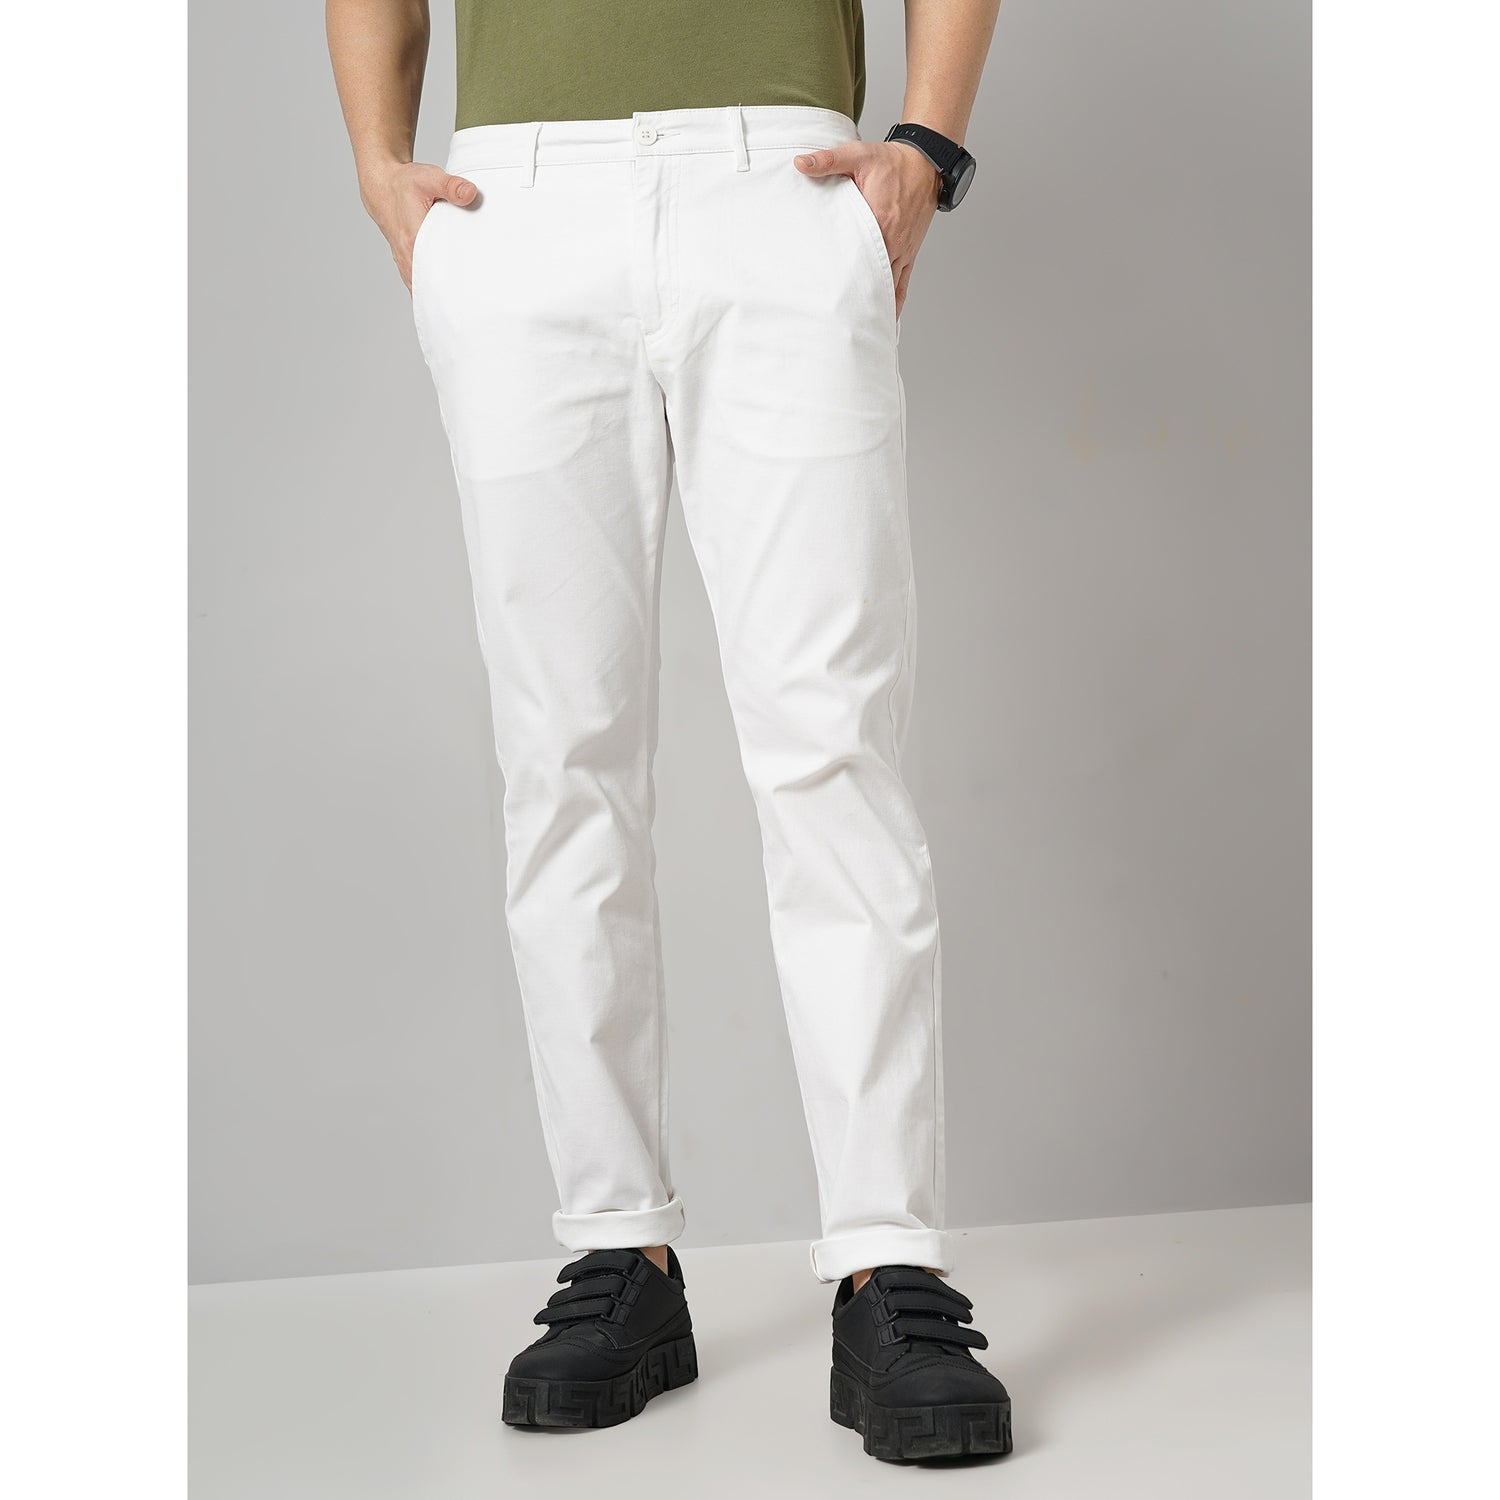 Men's Off White Solid Regular Fit Cotton Chino Trousers (TOCHARLES2)